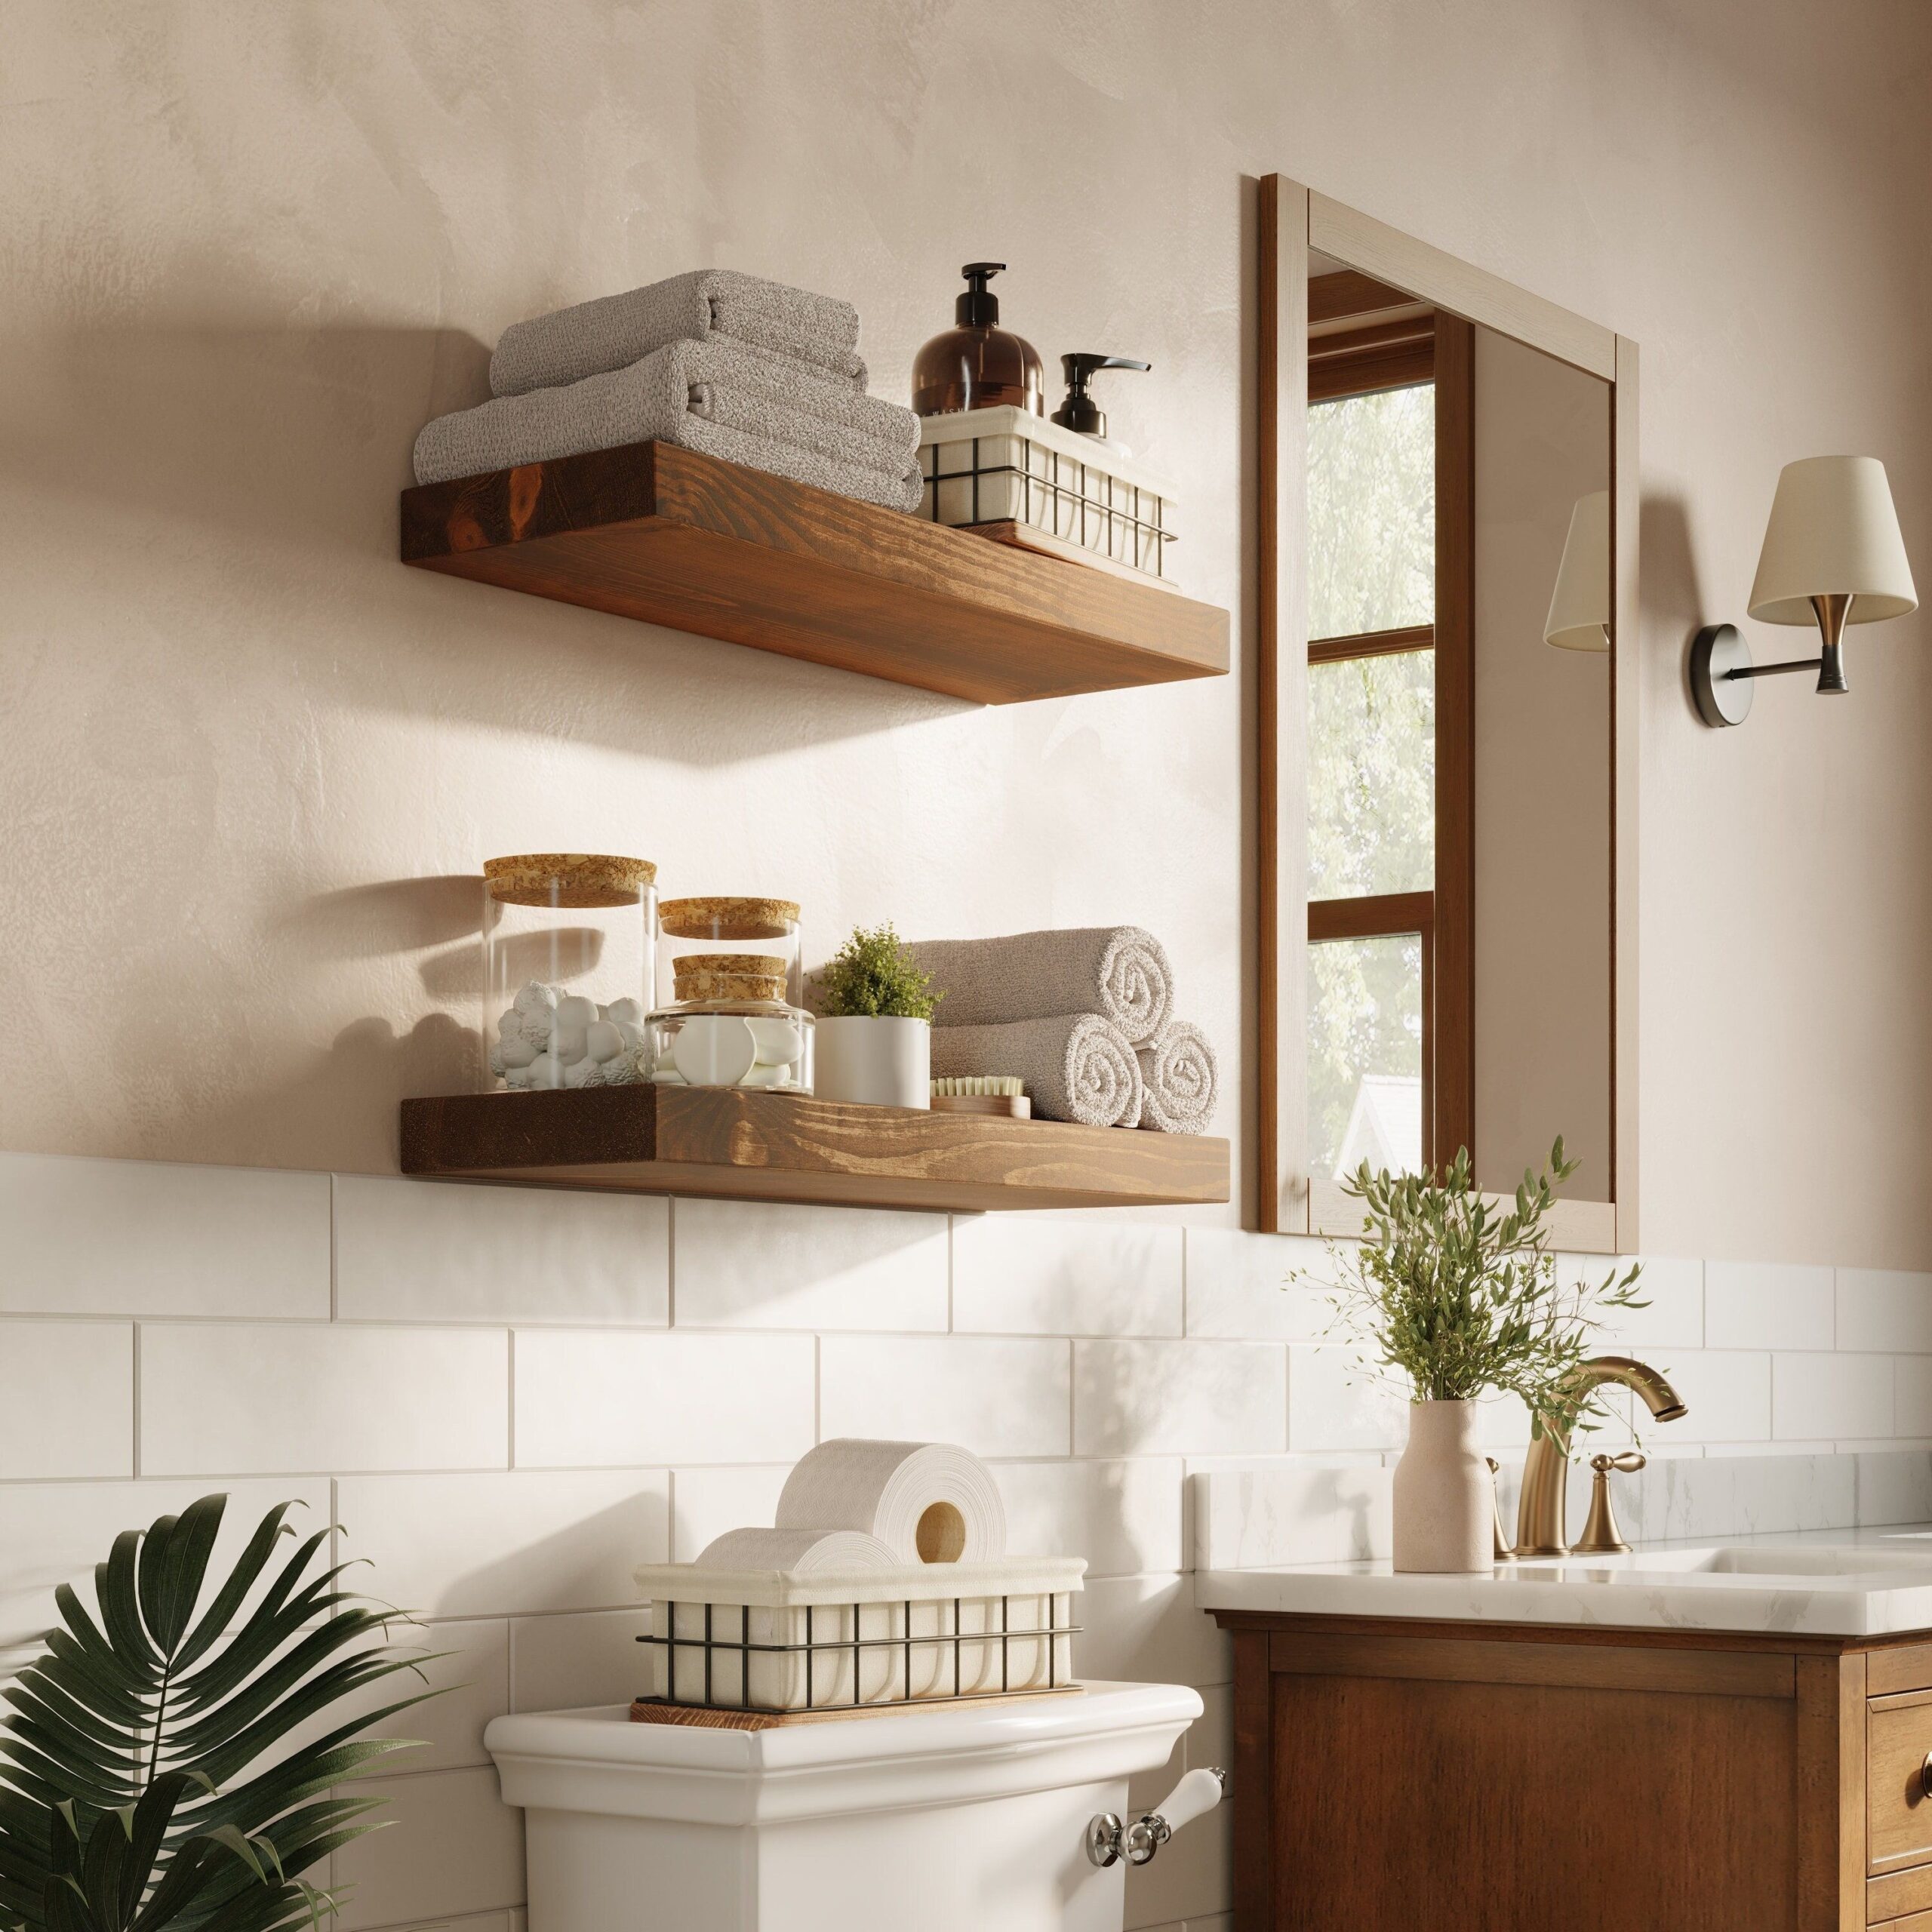 The Perfect Touch: Enhance Your Bathroom Decor with Stylish Wall Shelves